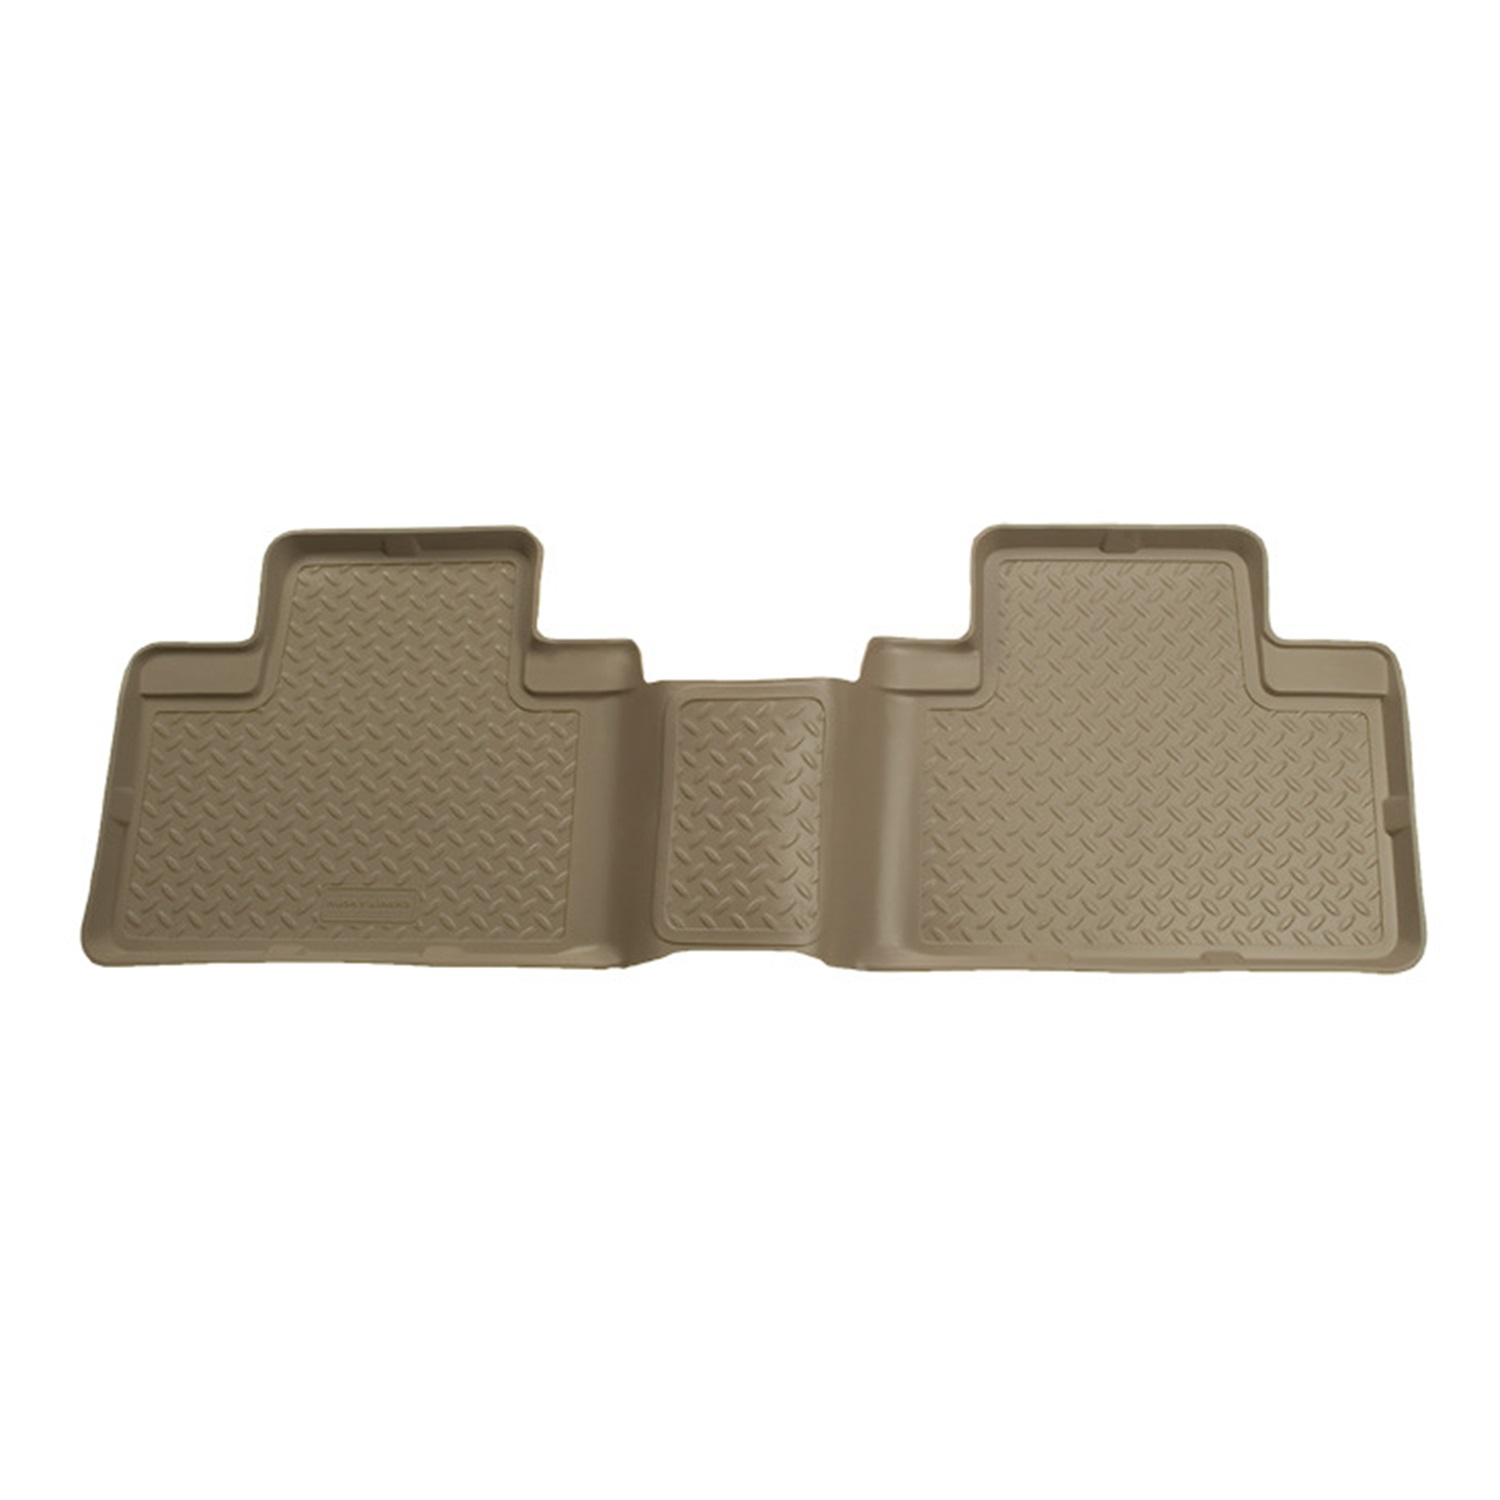 Husky Liners Husky Liners 73533 Classic Style; Floor Liner Fits 07-14 Expedition Navigator